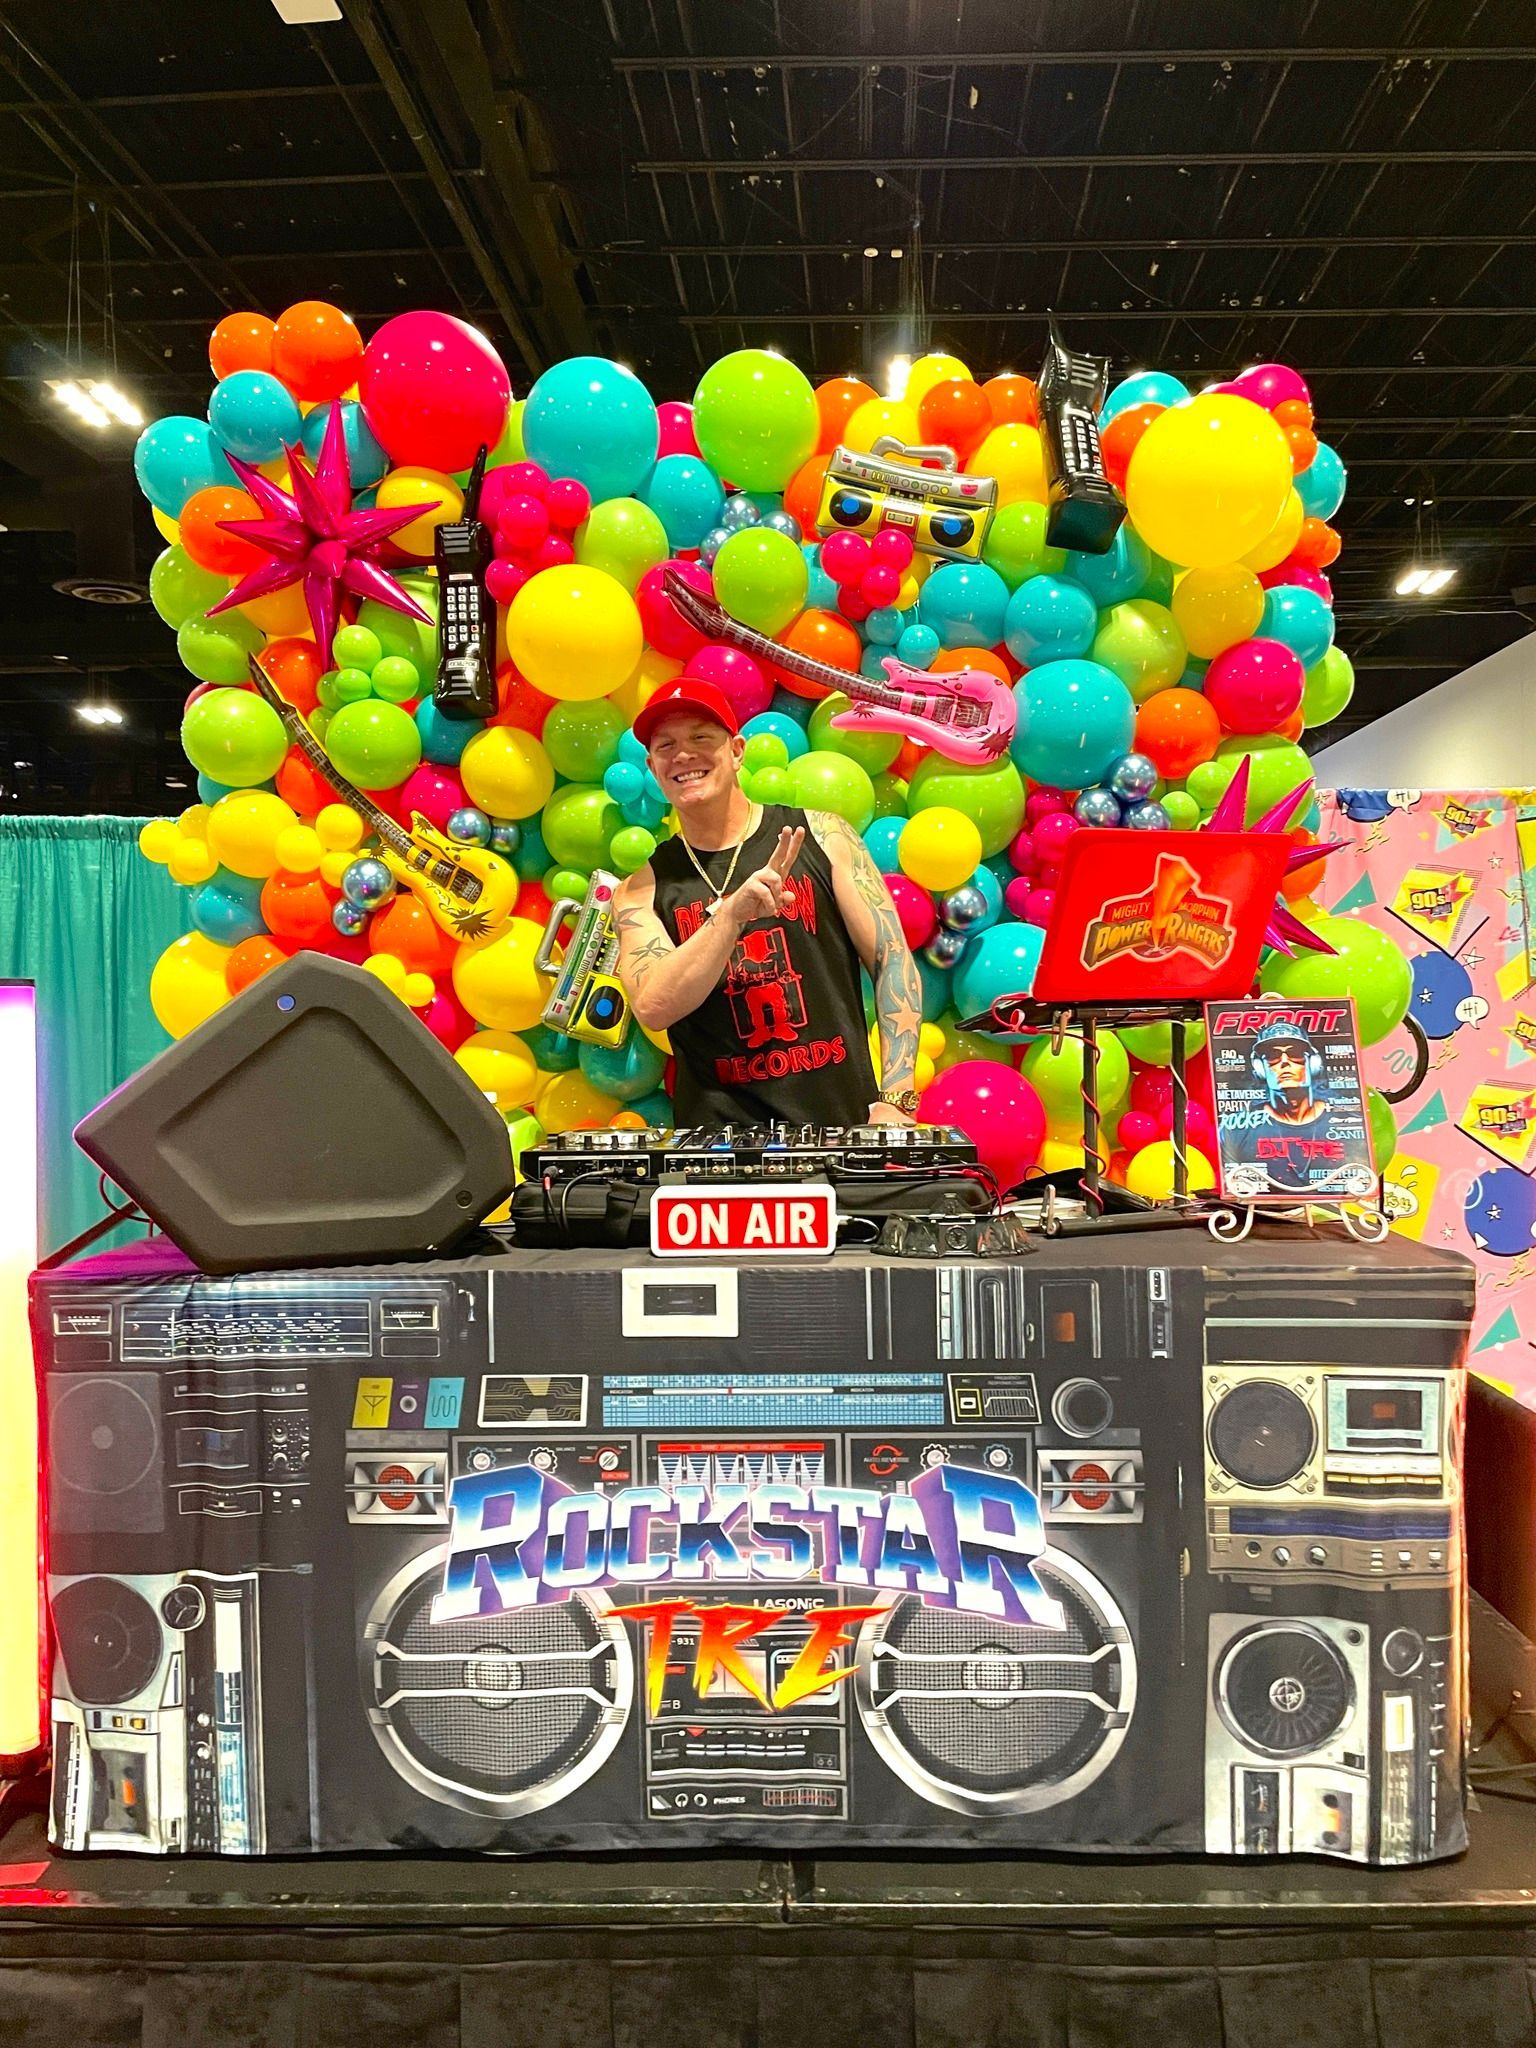 A dj is standing in front of a wall of colorful balloons.